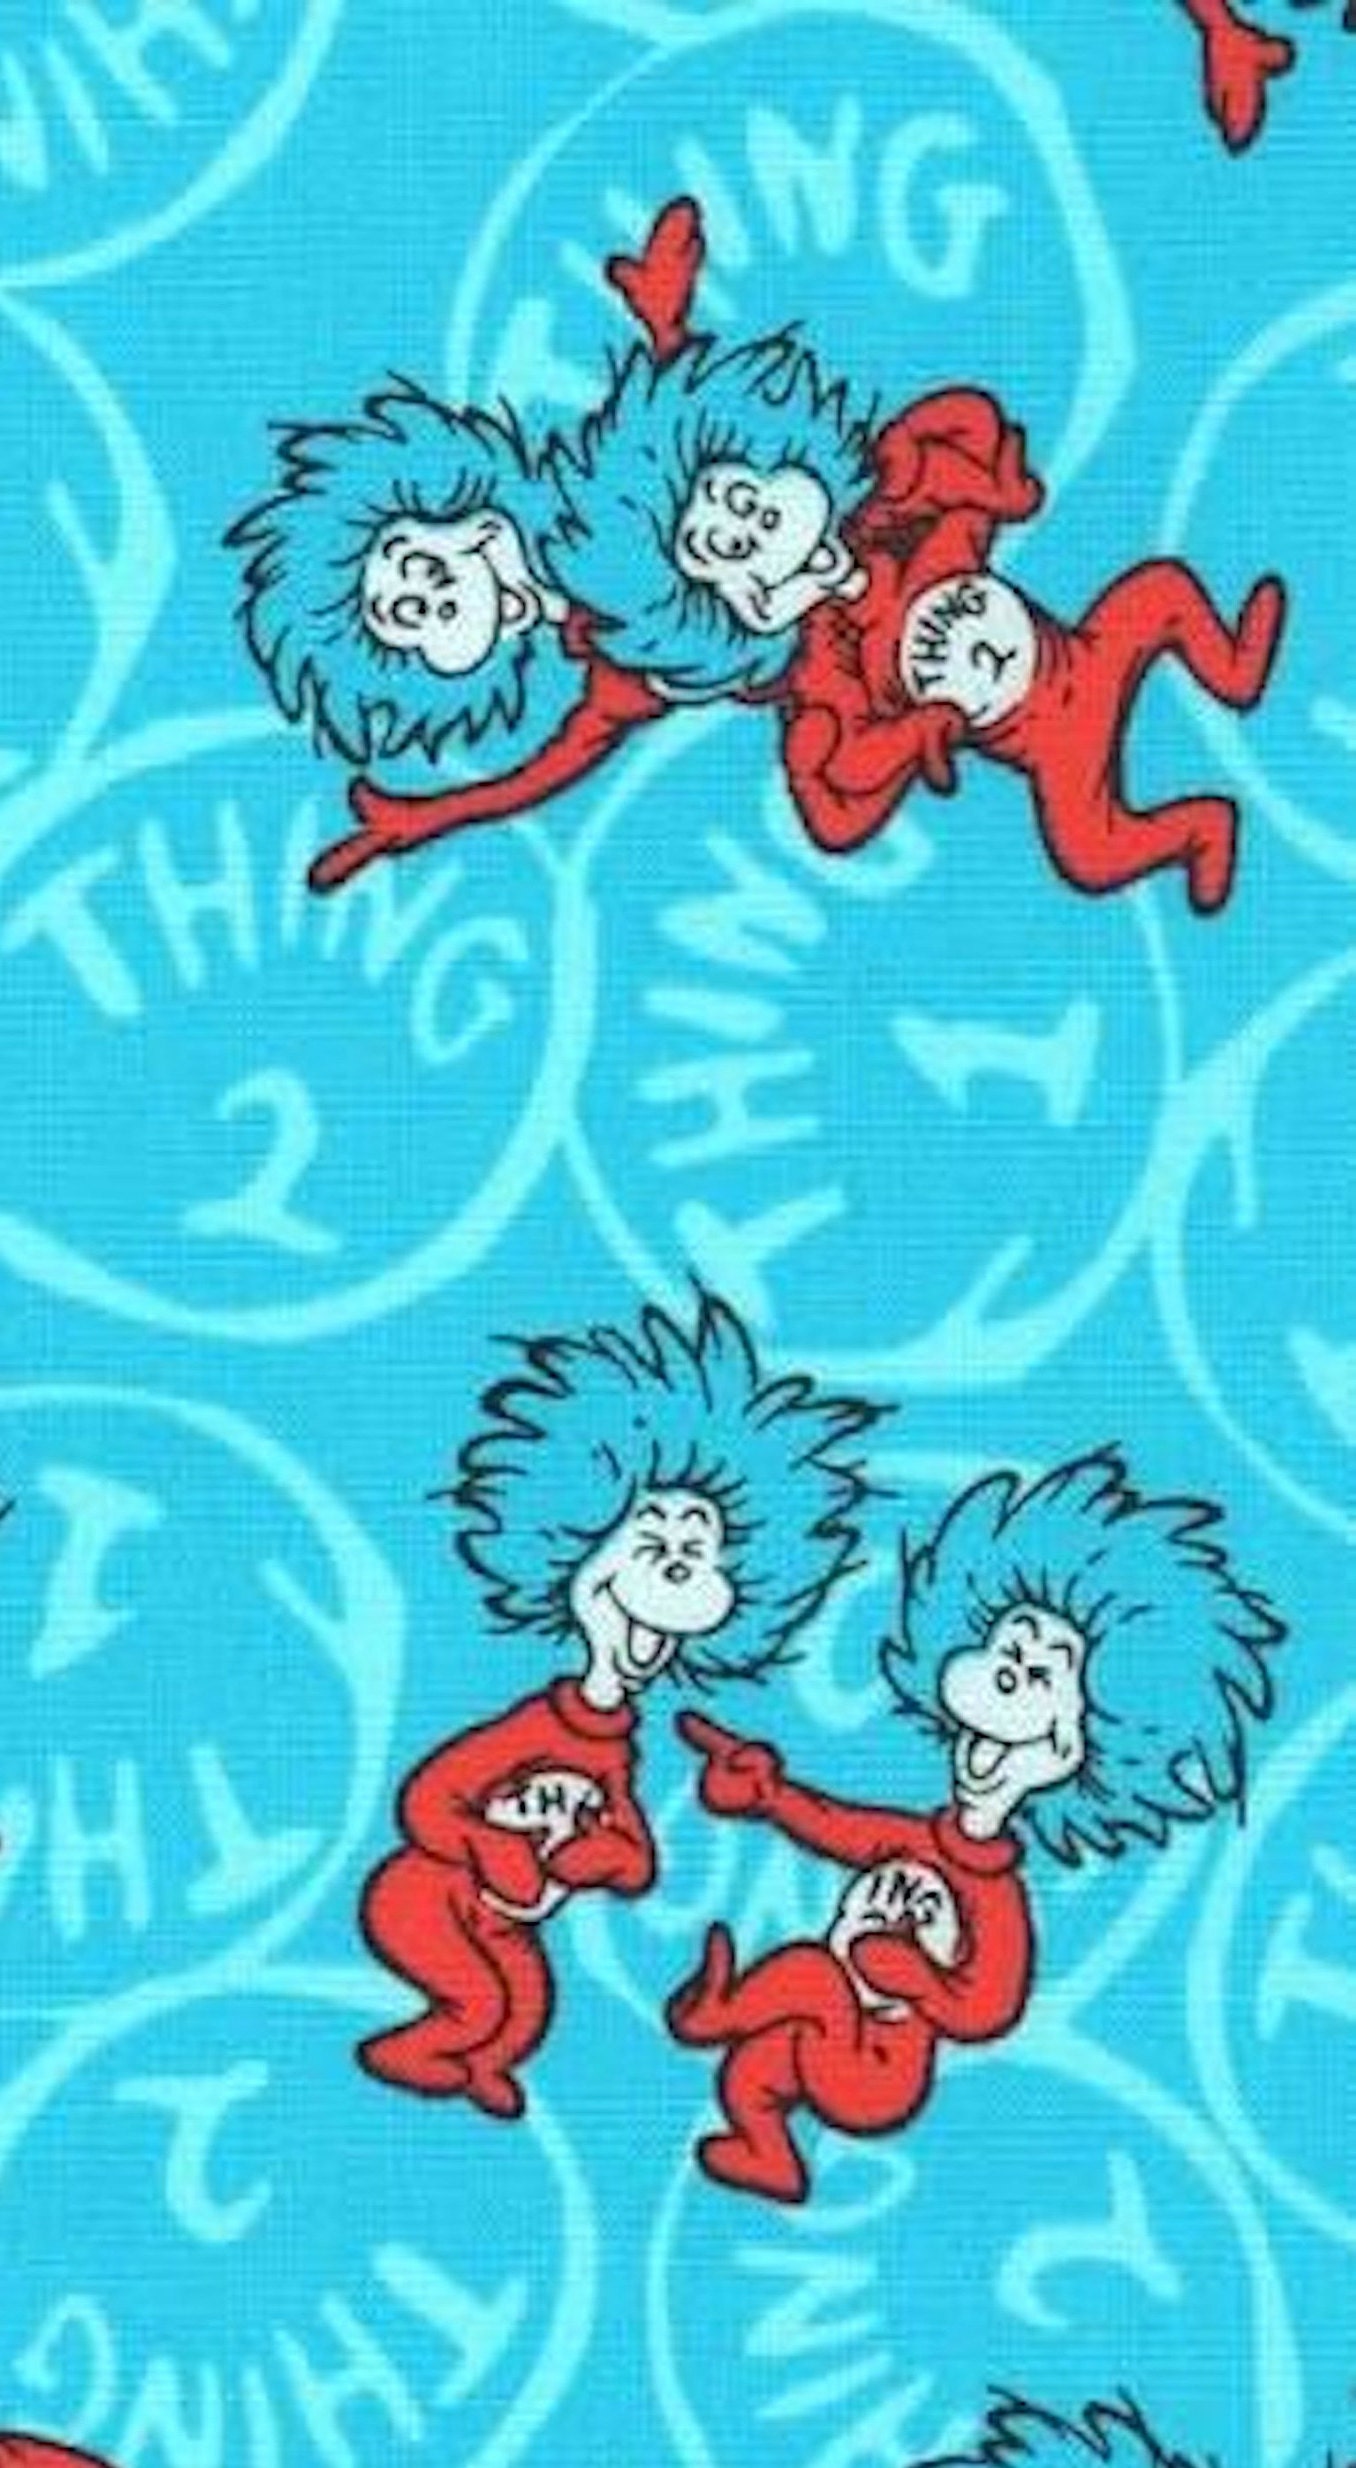 4 Yard Dr. Seuss Thing 1 Thing 2 Cotton Fabric By The 1 4 Quarter Yard Or 1 2 Yard Masks Quilting